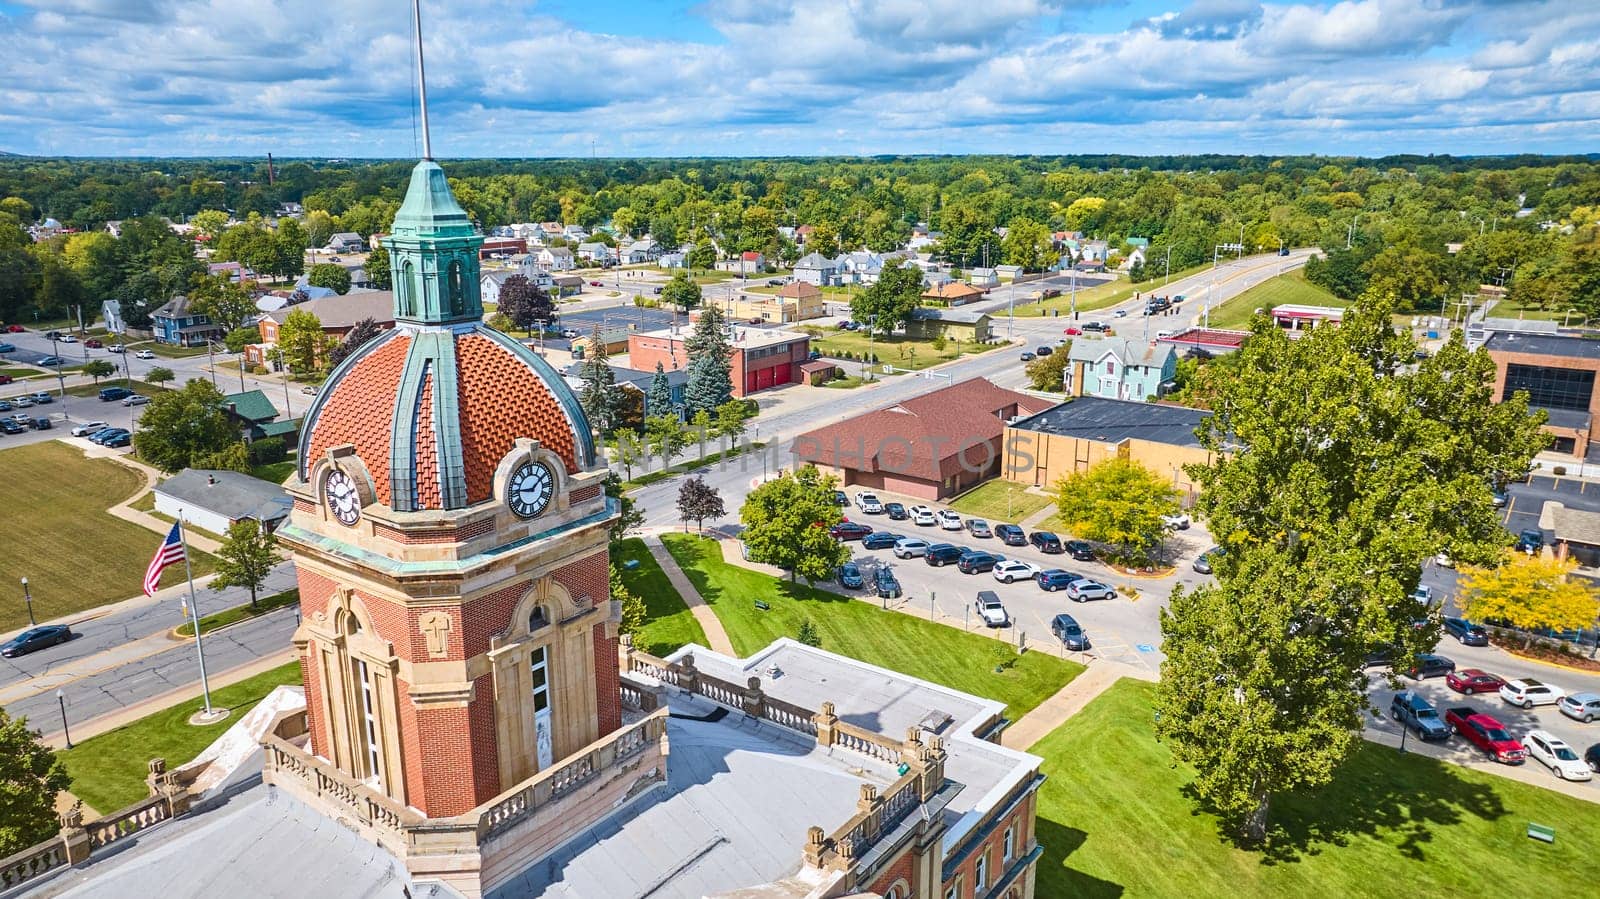 Aerial View of Elkhart Courthouse and Suburban Townscape by njproductions